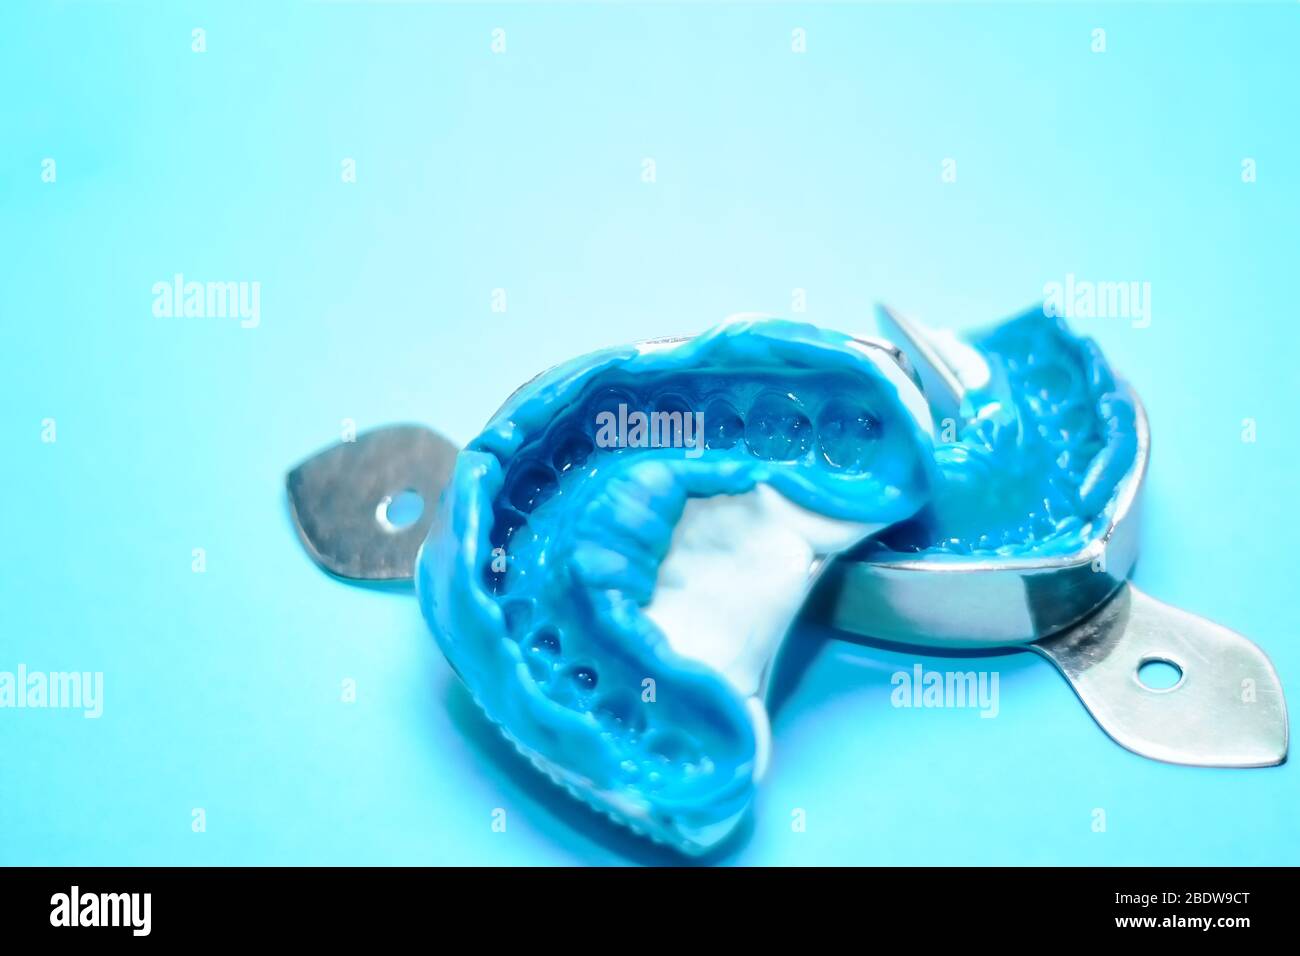 Two dental impressions on a blue background with copy space. Dental molds from the upper and lower jaws of silicone material. Stock Photo